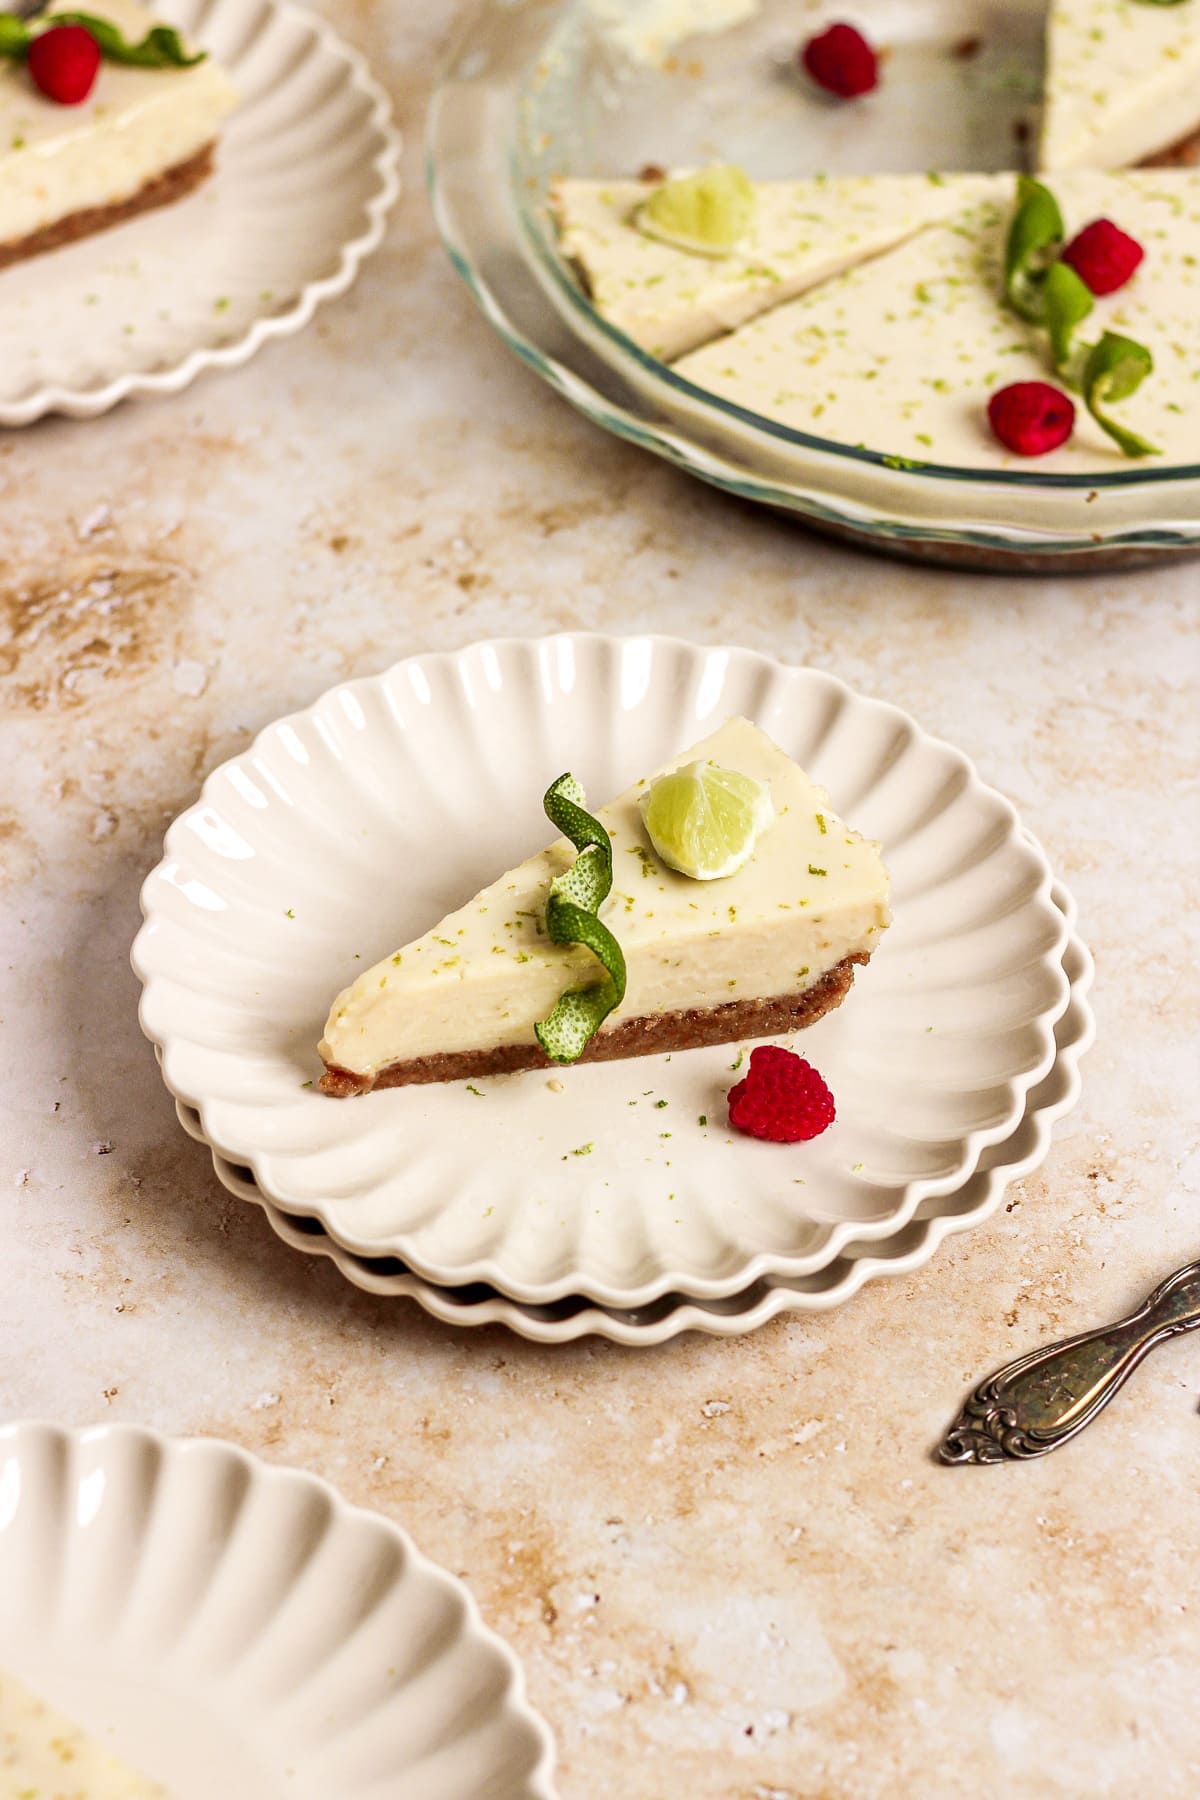 key lime pie with raspberries and lime garnish